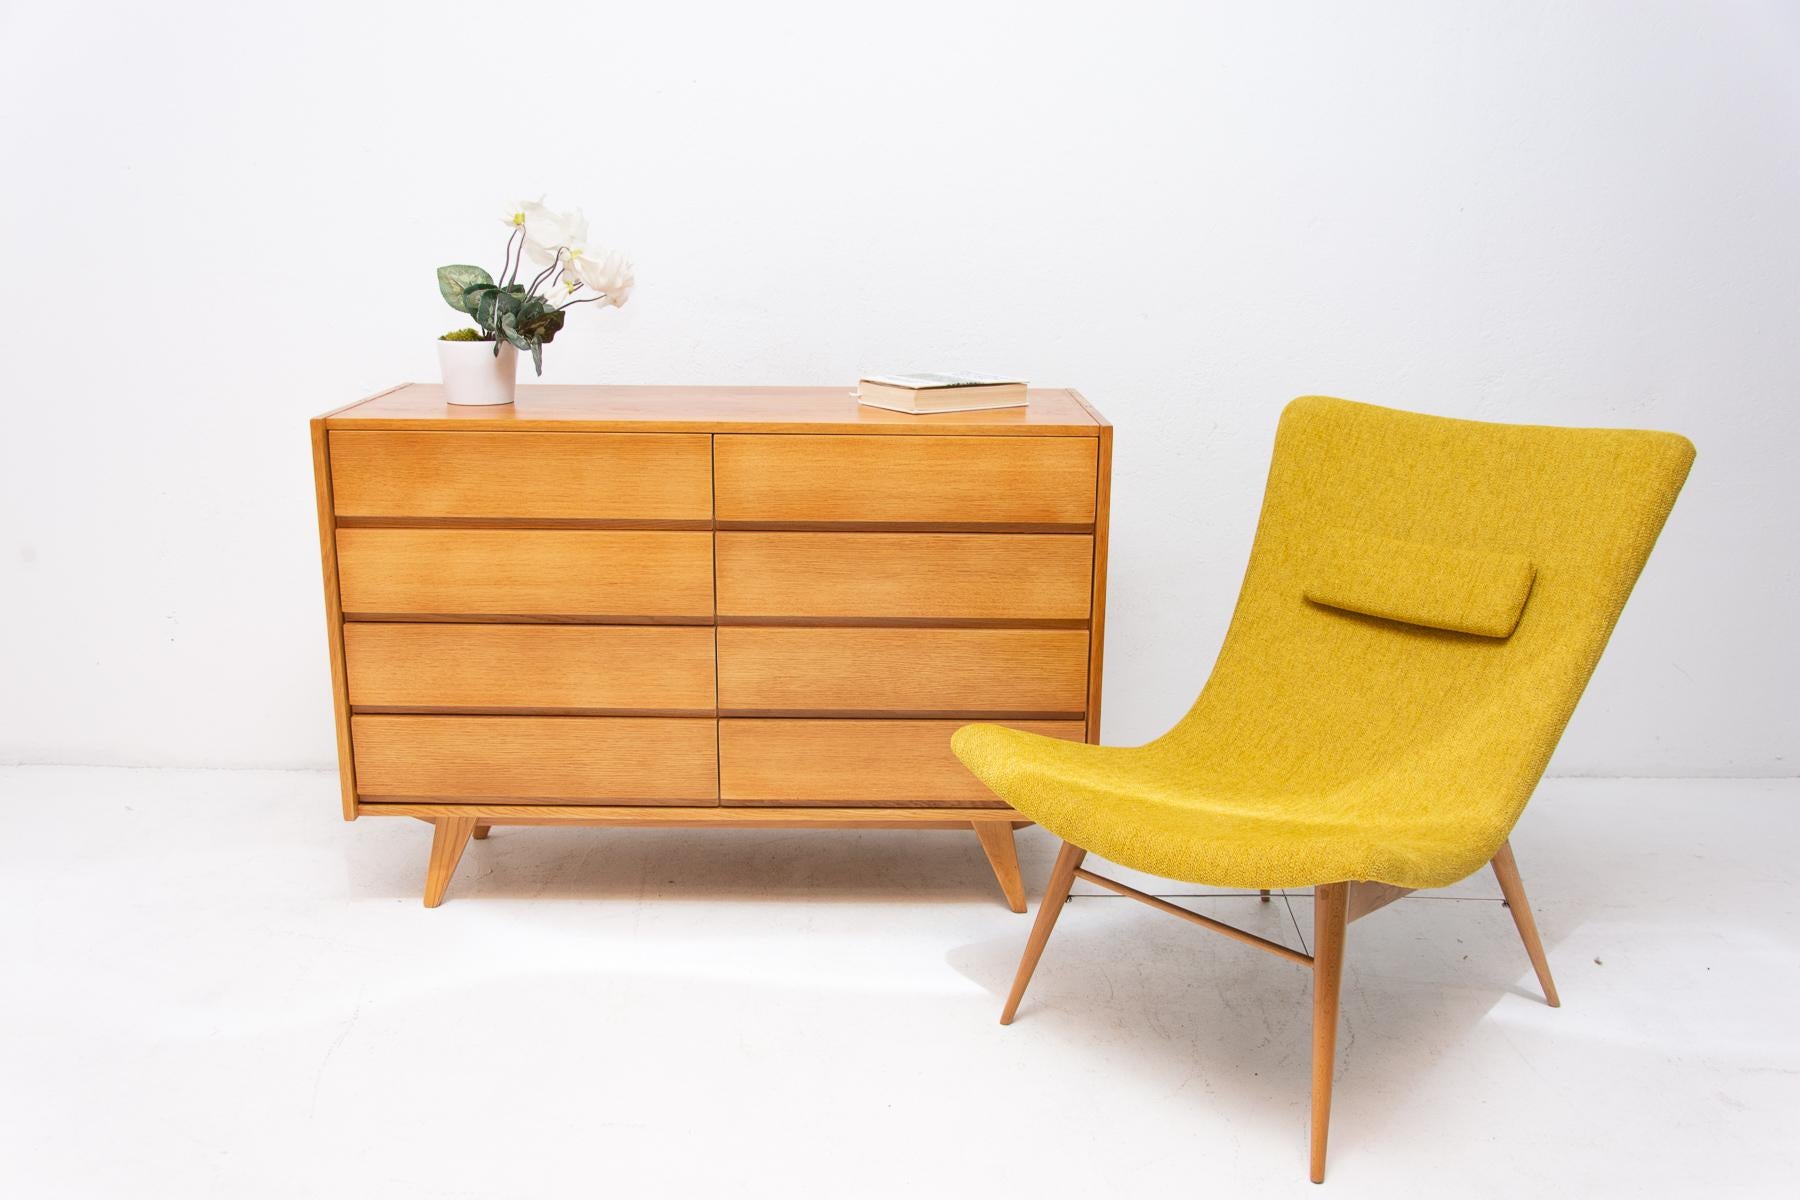 Midcentury chest of drawers, model no. U-453, designed by Jirí Jiroutek for Interiér Praha. It was made in the former Czechoslovakia in the 1960s. This model is associated with the world-famous EXPO 58 in Brussels. It´s made of oakwood and plywood